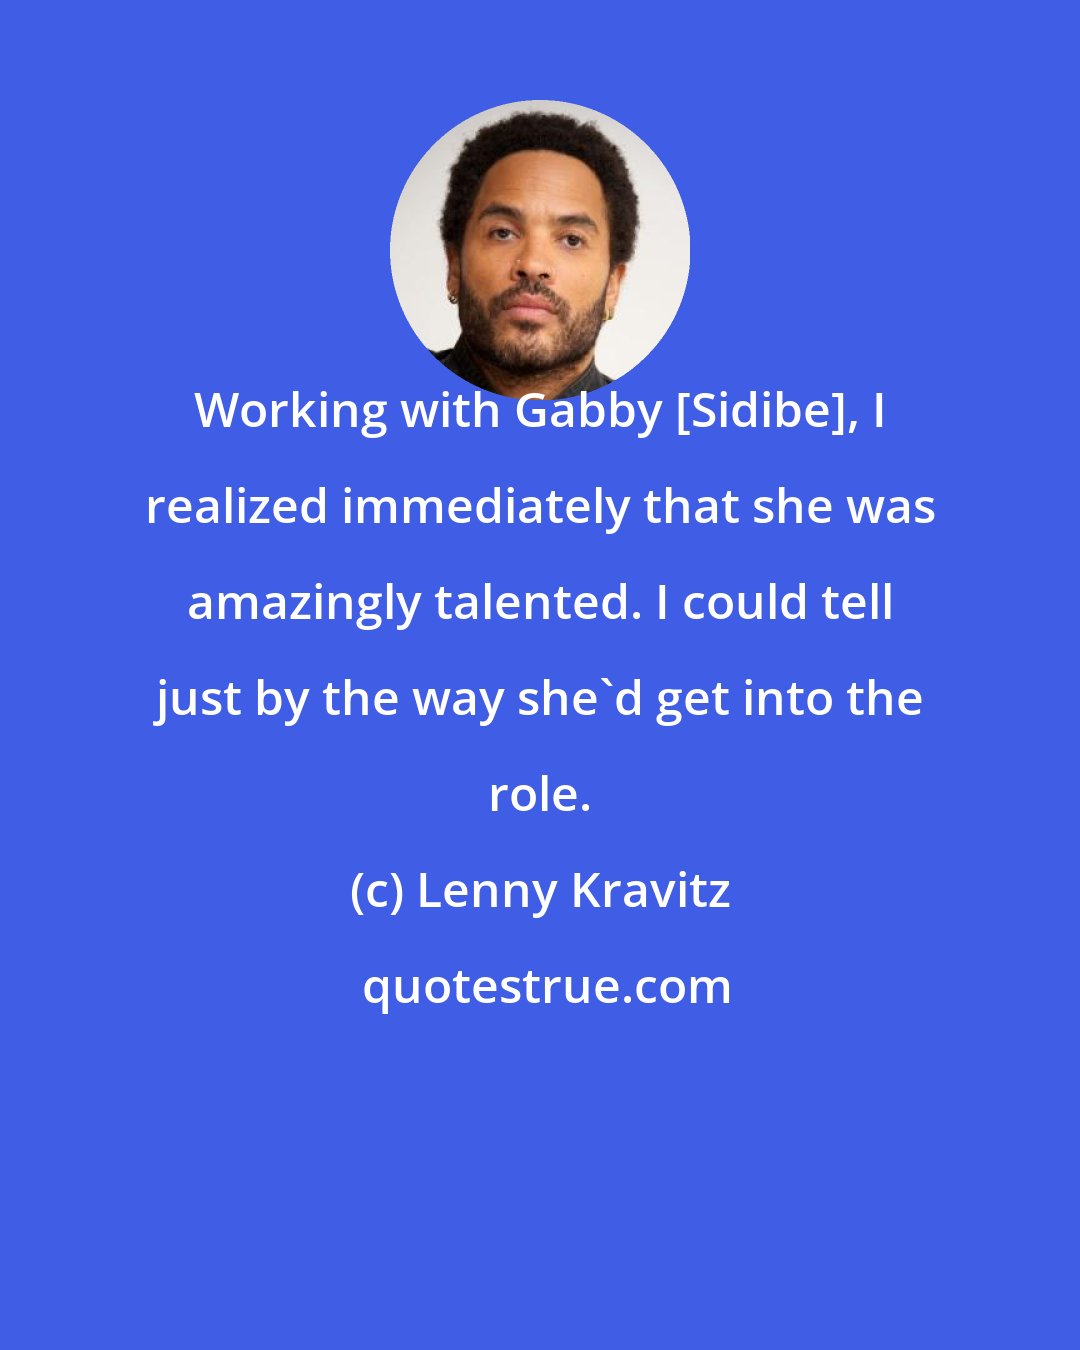 Lenny Kravitz: Working with Gabby [Sidibe], I realized immediately that she was amazingly talented. I could tell just by the way she'd get into the role.